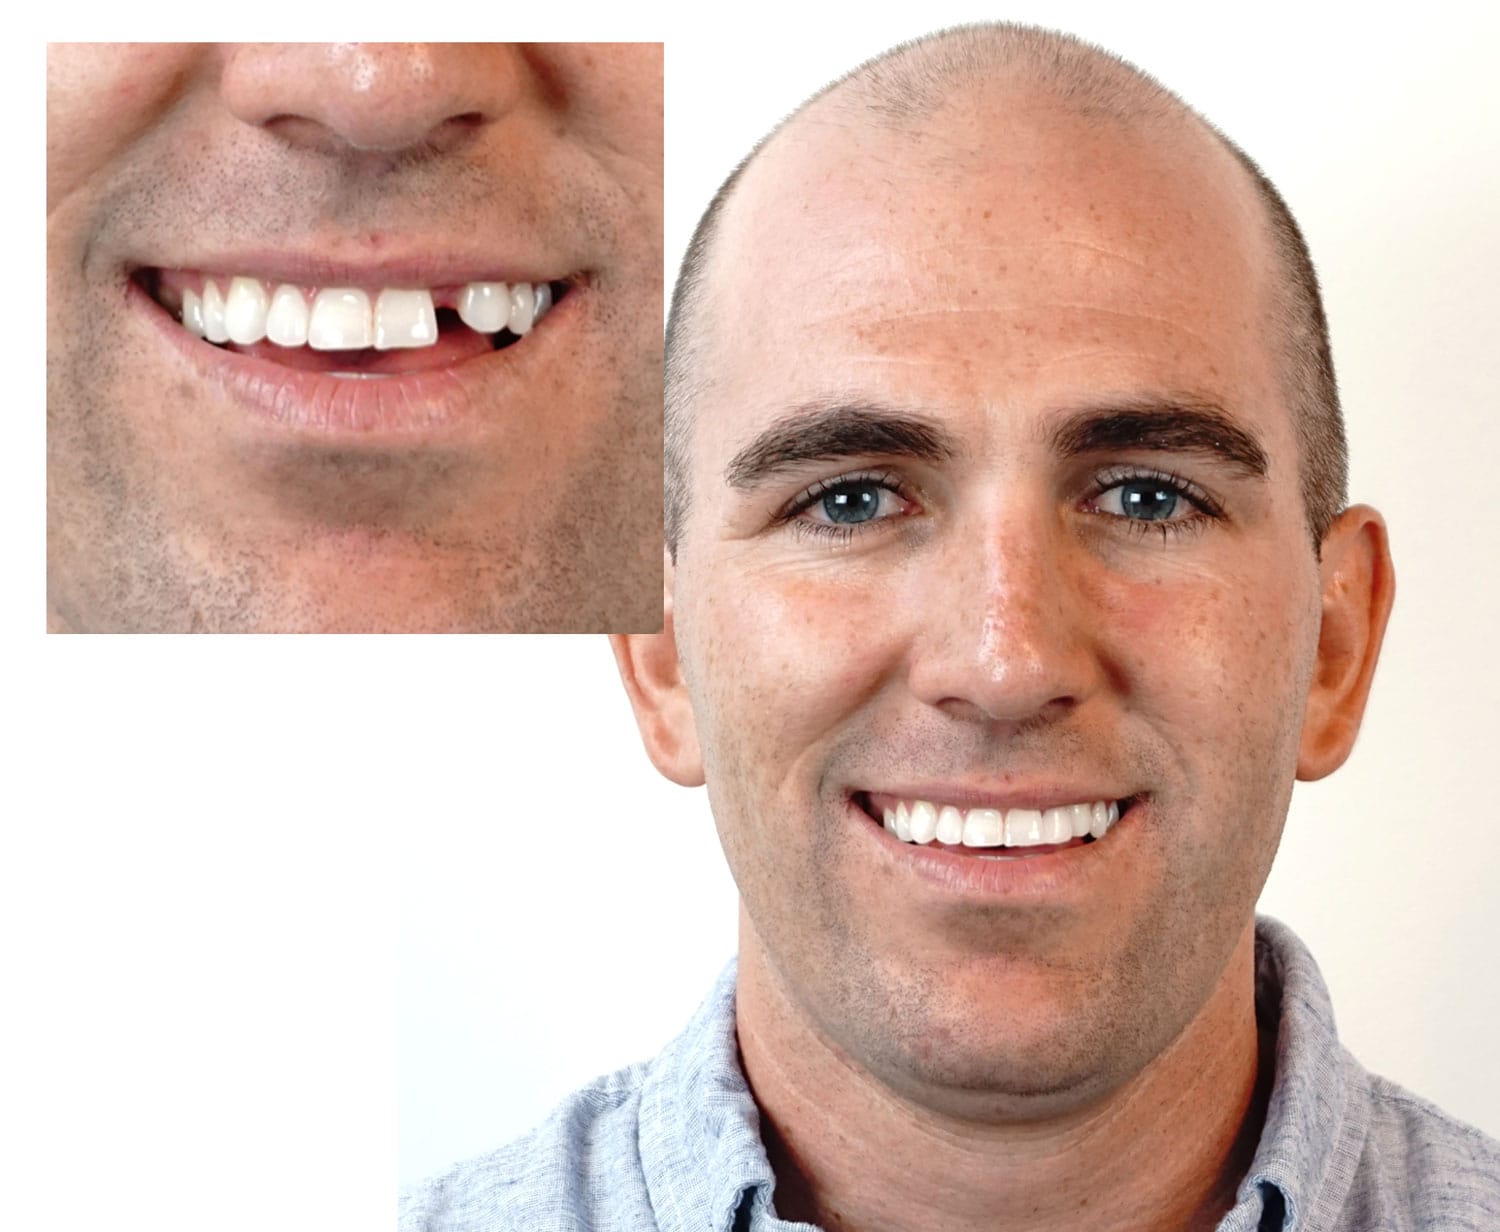 Instant Smile MULTISHADE Patented Temporary Tooth Repair Kit. A Realistic  Looking Fix for a Missing or